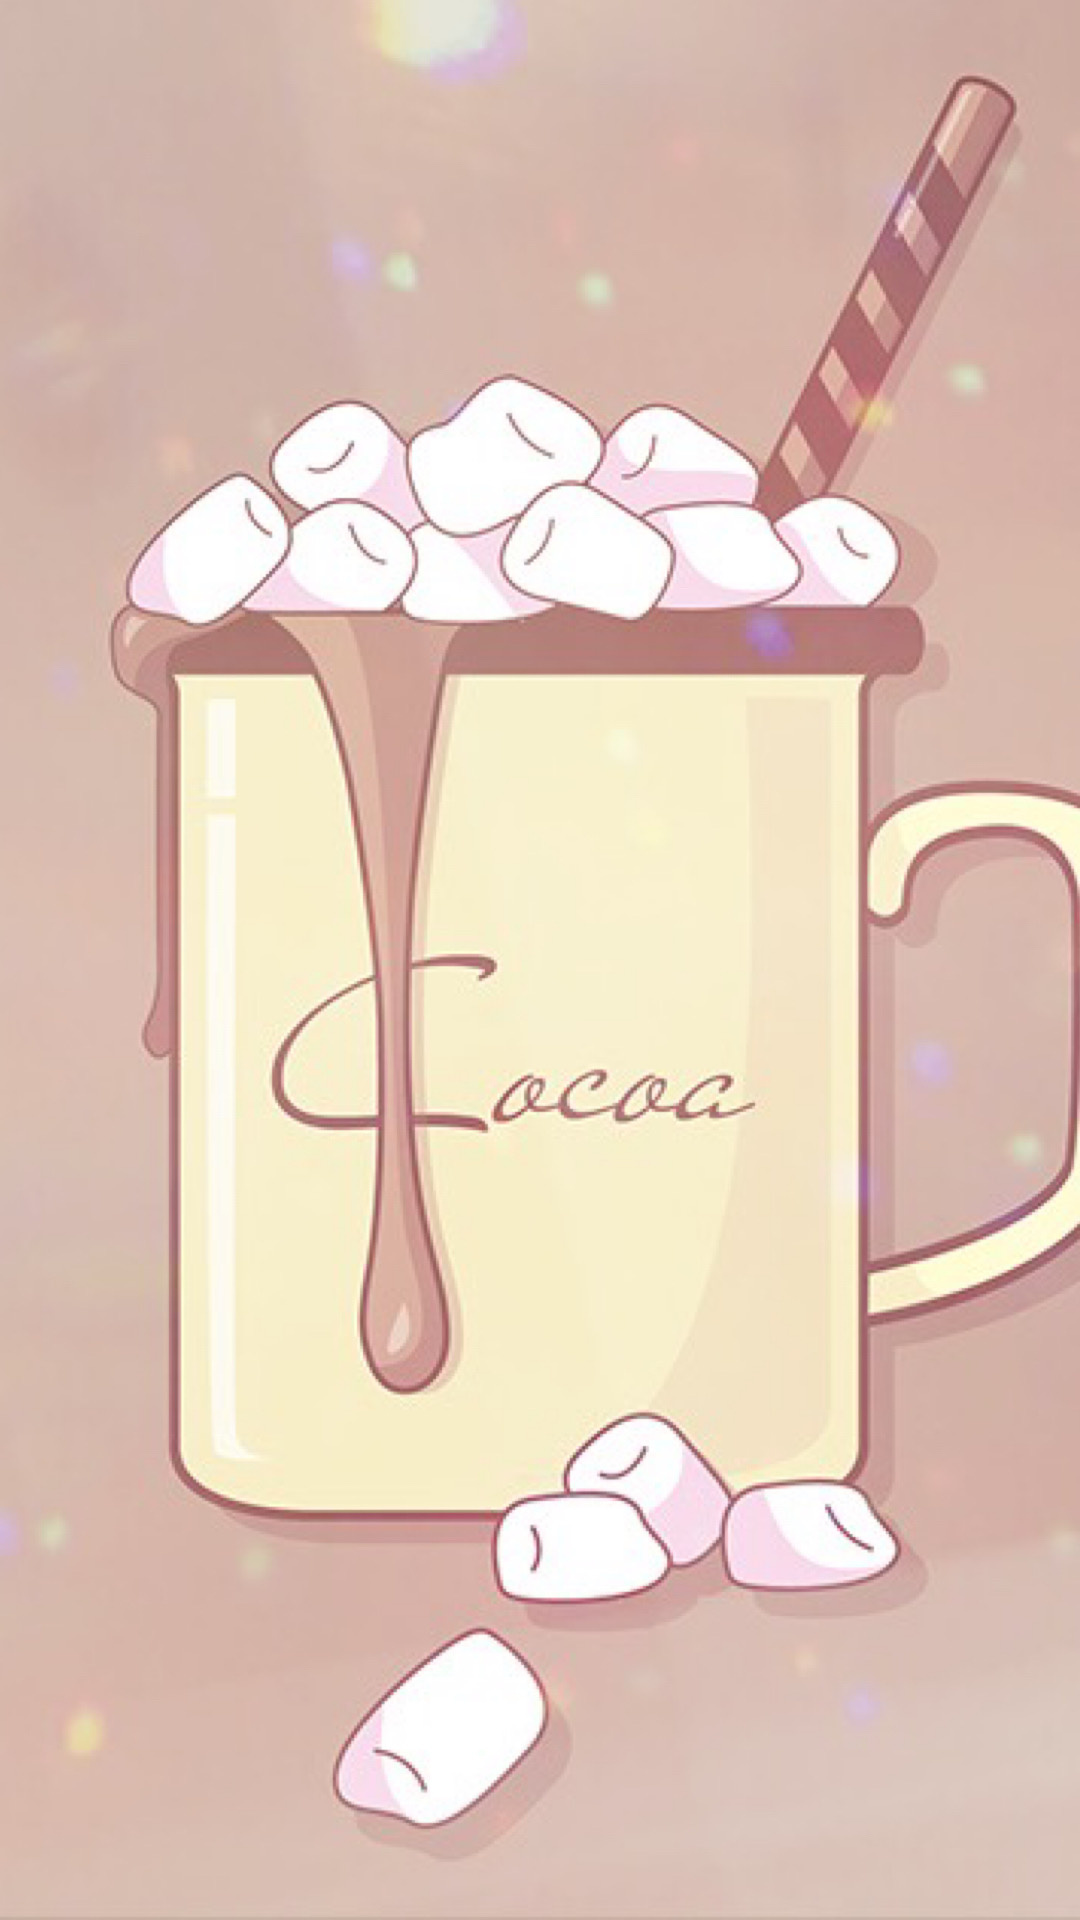 Marshmallow: Candies, popularly paired with hot chocolate. 1080x1920 Full HD Background.